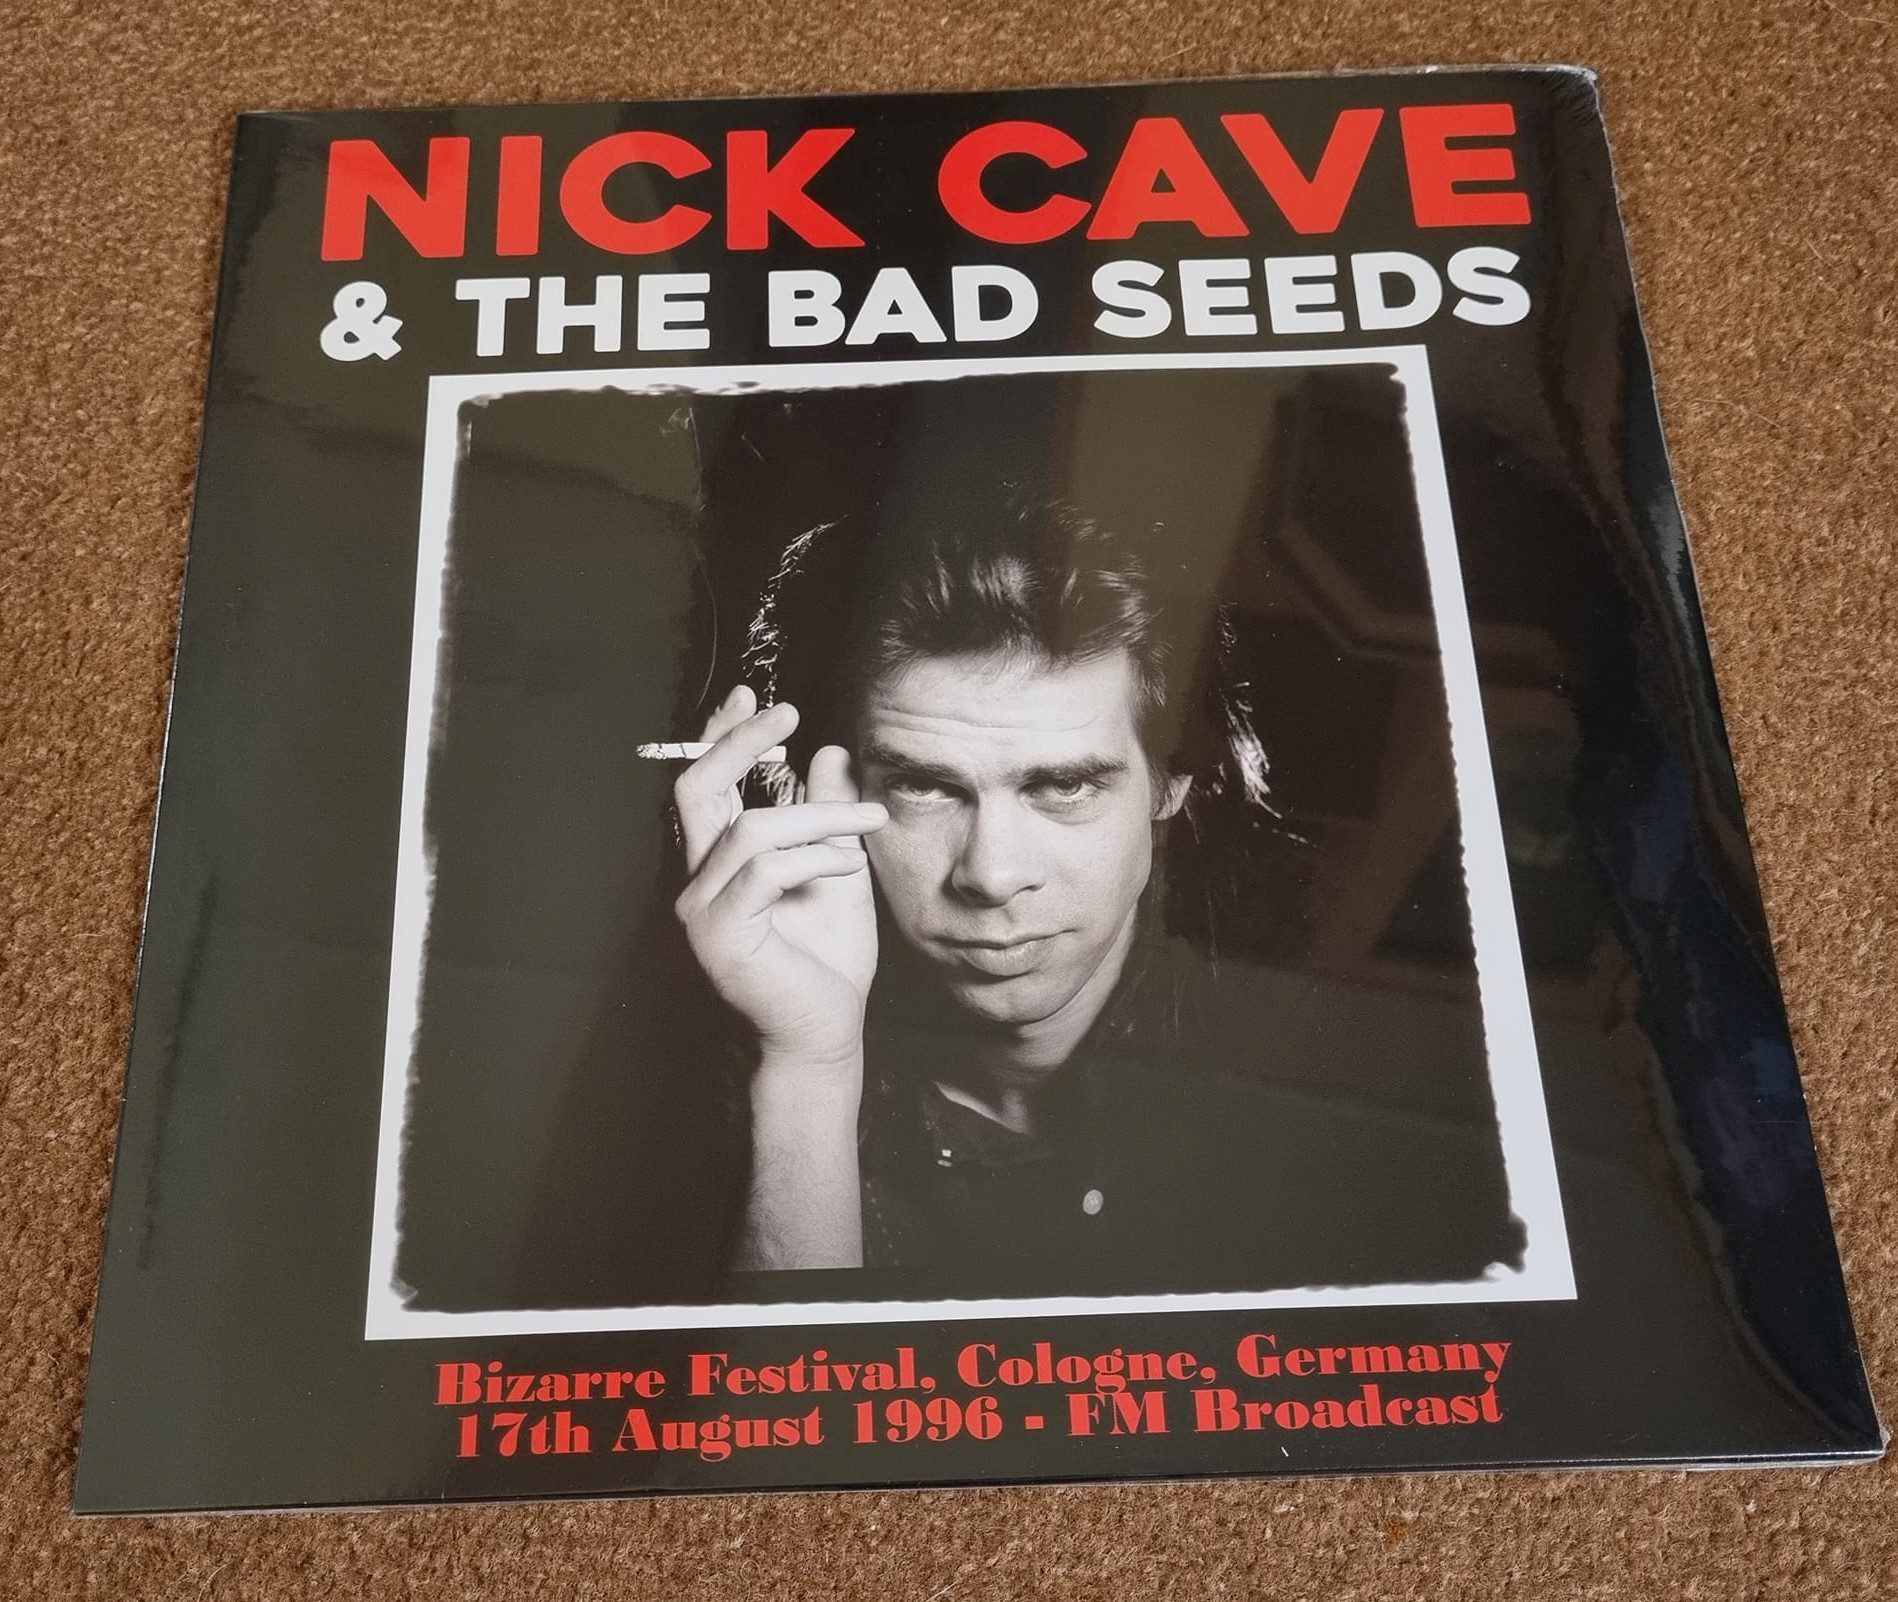 Buy this rare Nick Cave & Bad Seeds by clicking here